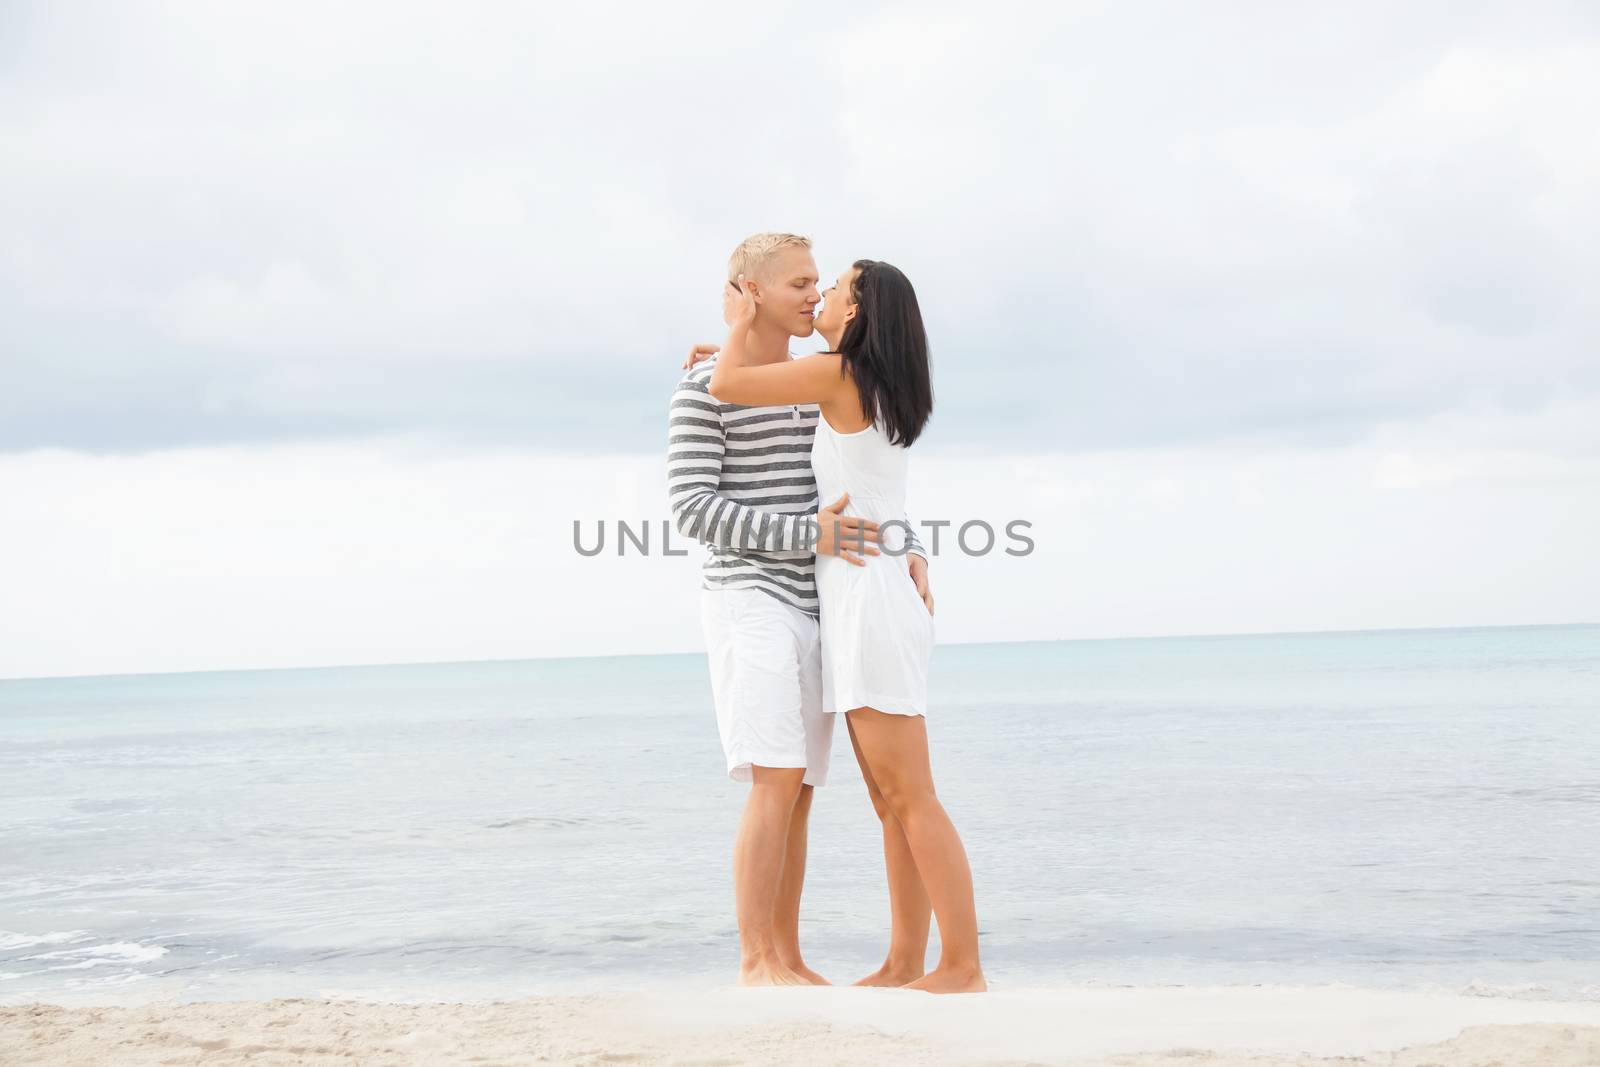 Caucasian happy young couple holding hands while walking barefoot on the beach in a romantic travel destination